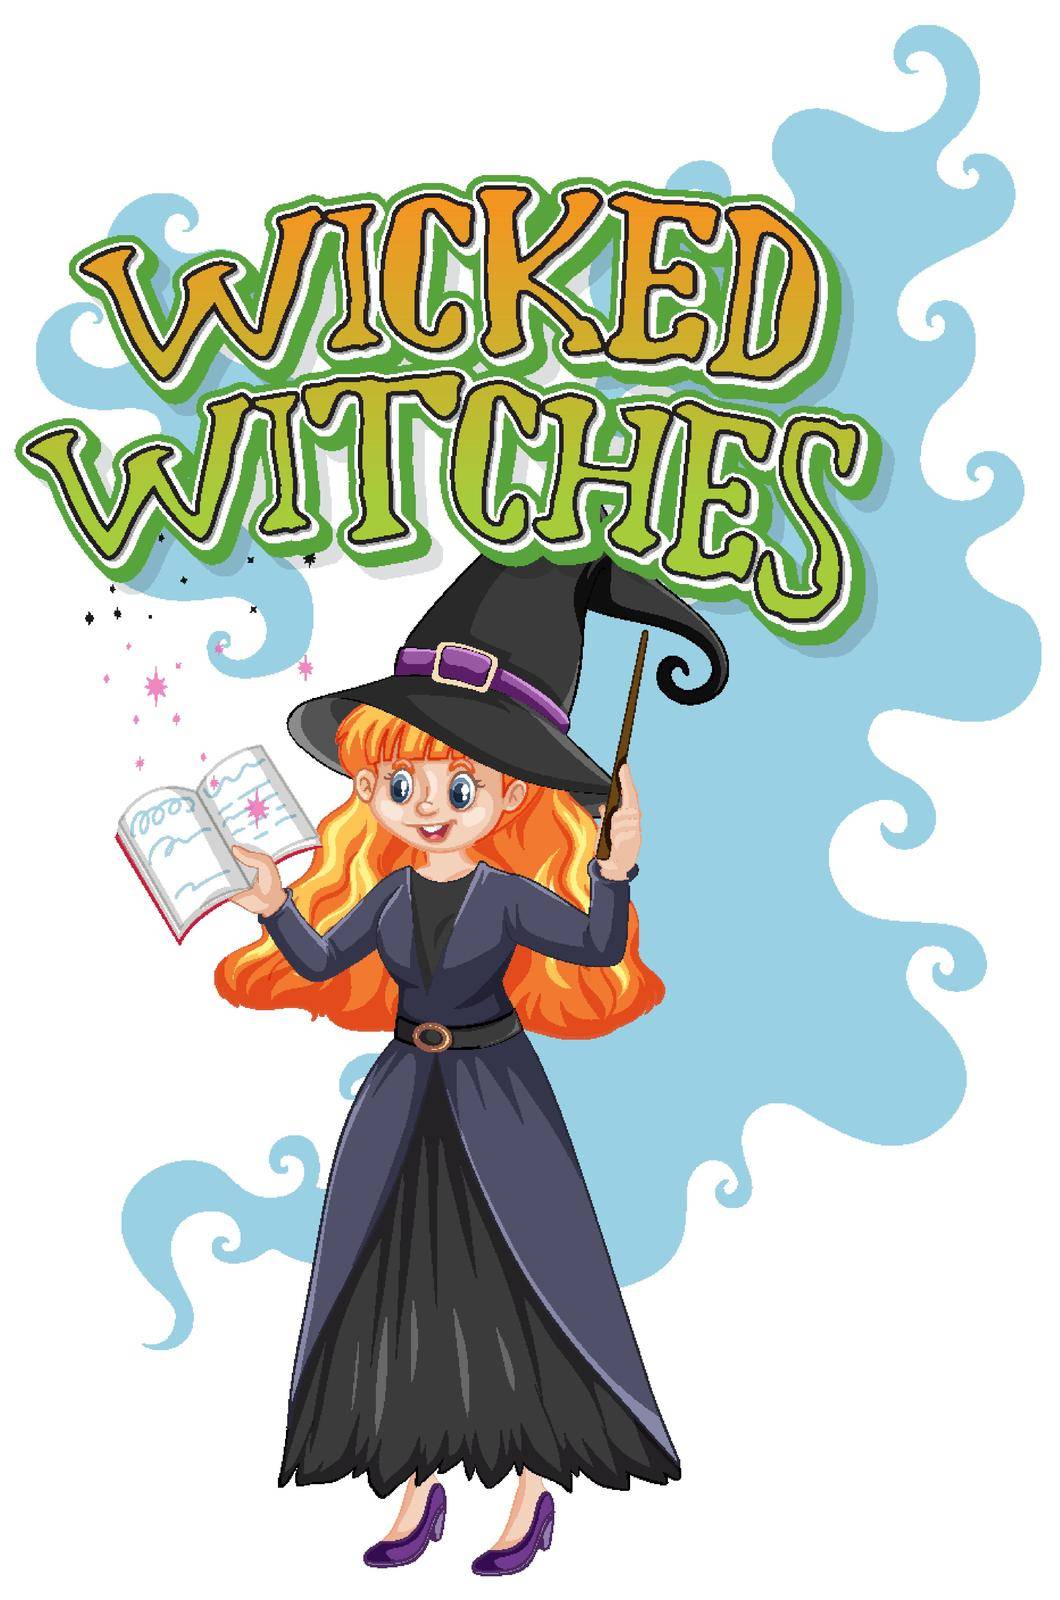 Wicked witches logo on white background by iimages